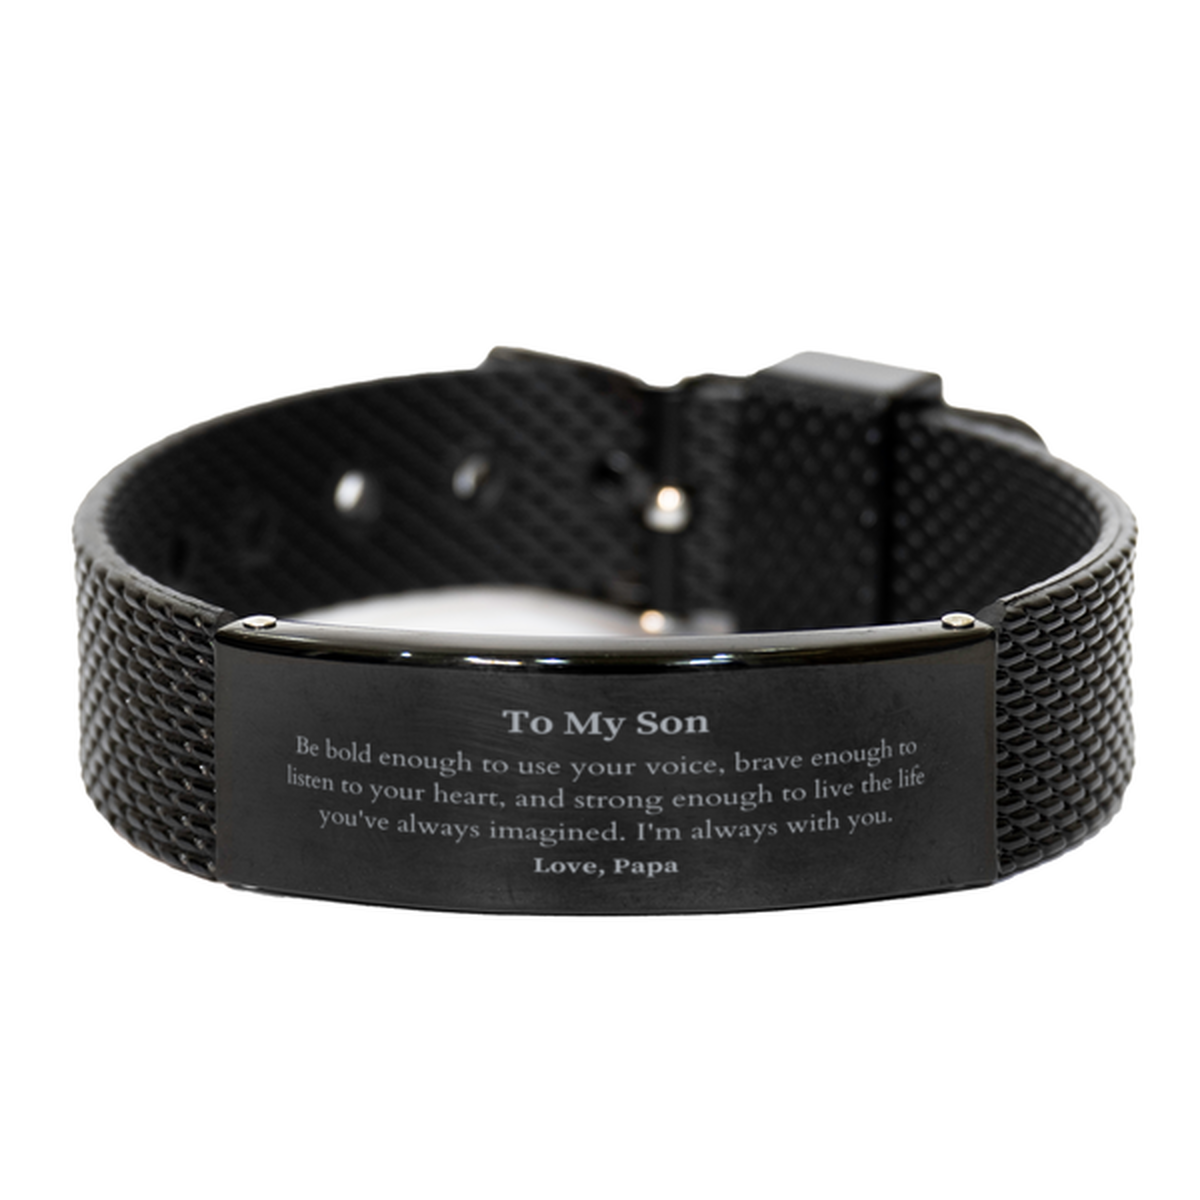 Keepsake Son Black Shark Mesh Bracelet Gift Idea Graduation Christmas Birthday Son from Papa, Son Be bold enough to use your voice, brave enough to listen to your heart. Love, Papa